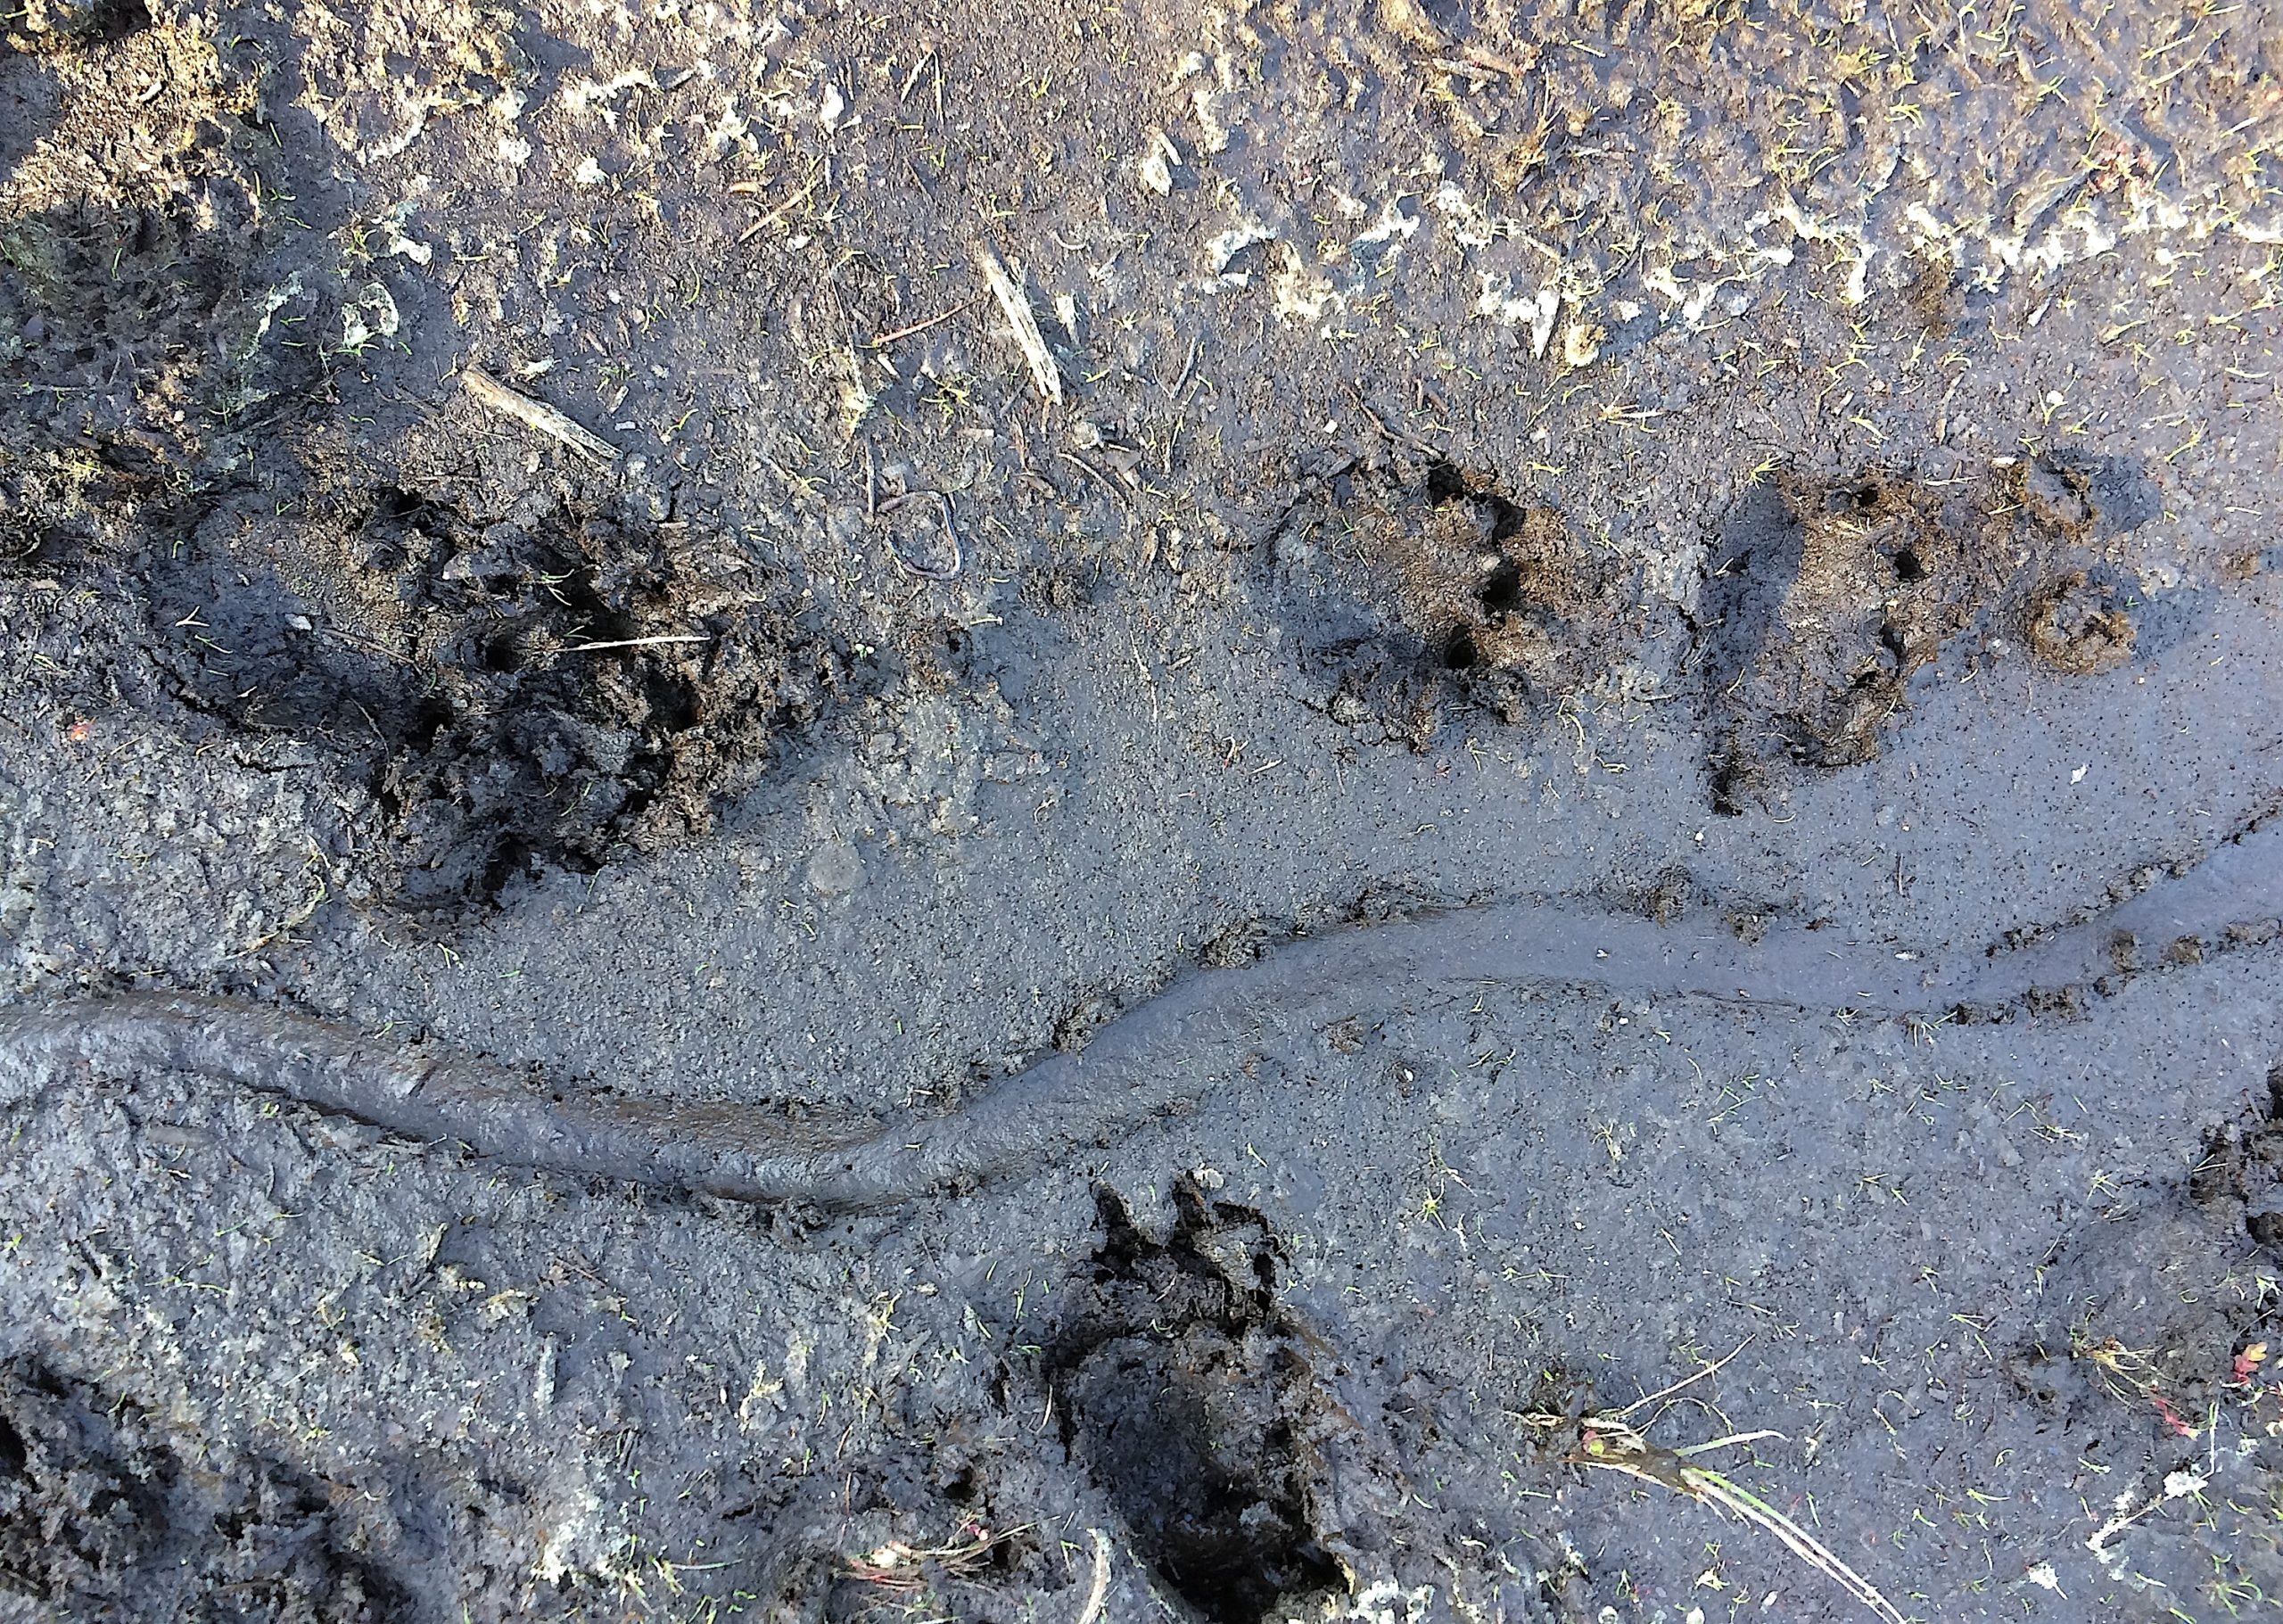 Photo 3: In the snapping turtle’s walking gait, the round rear feet land behind the oval fronts.